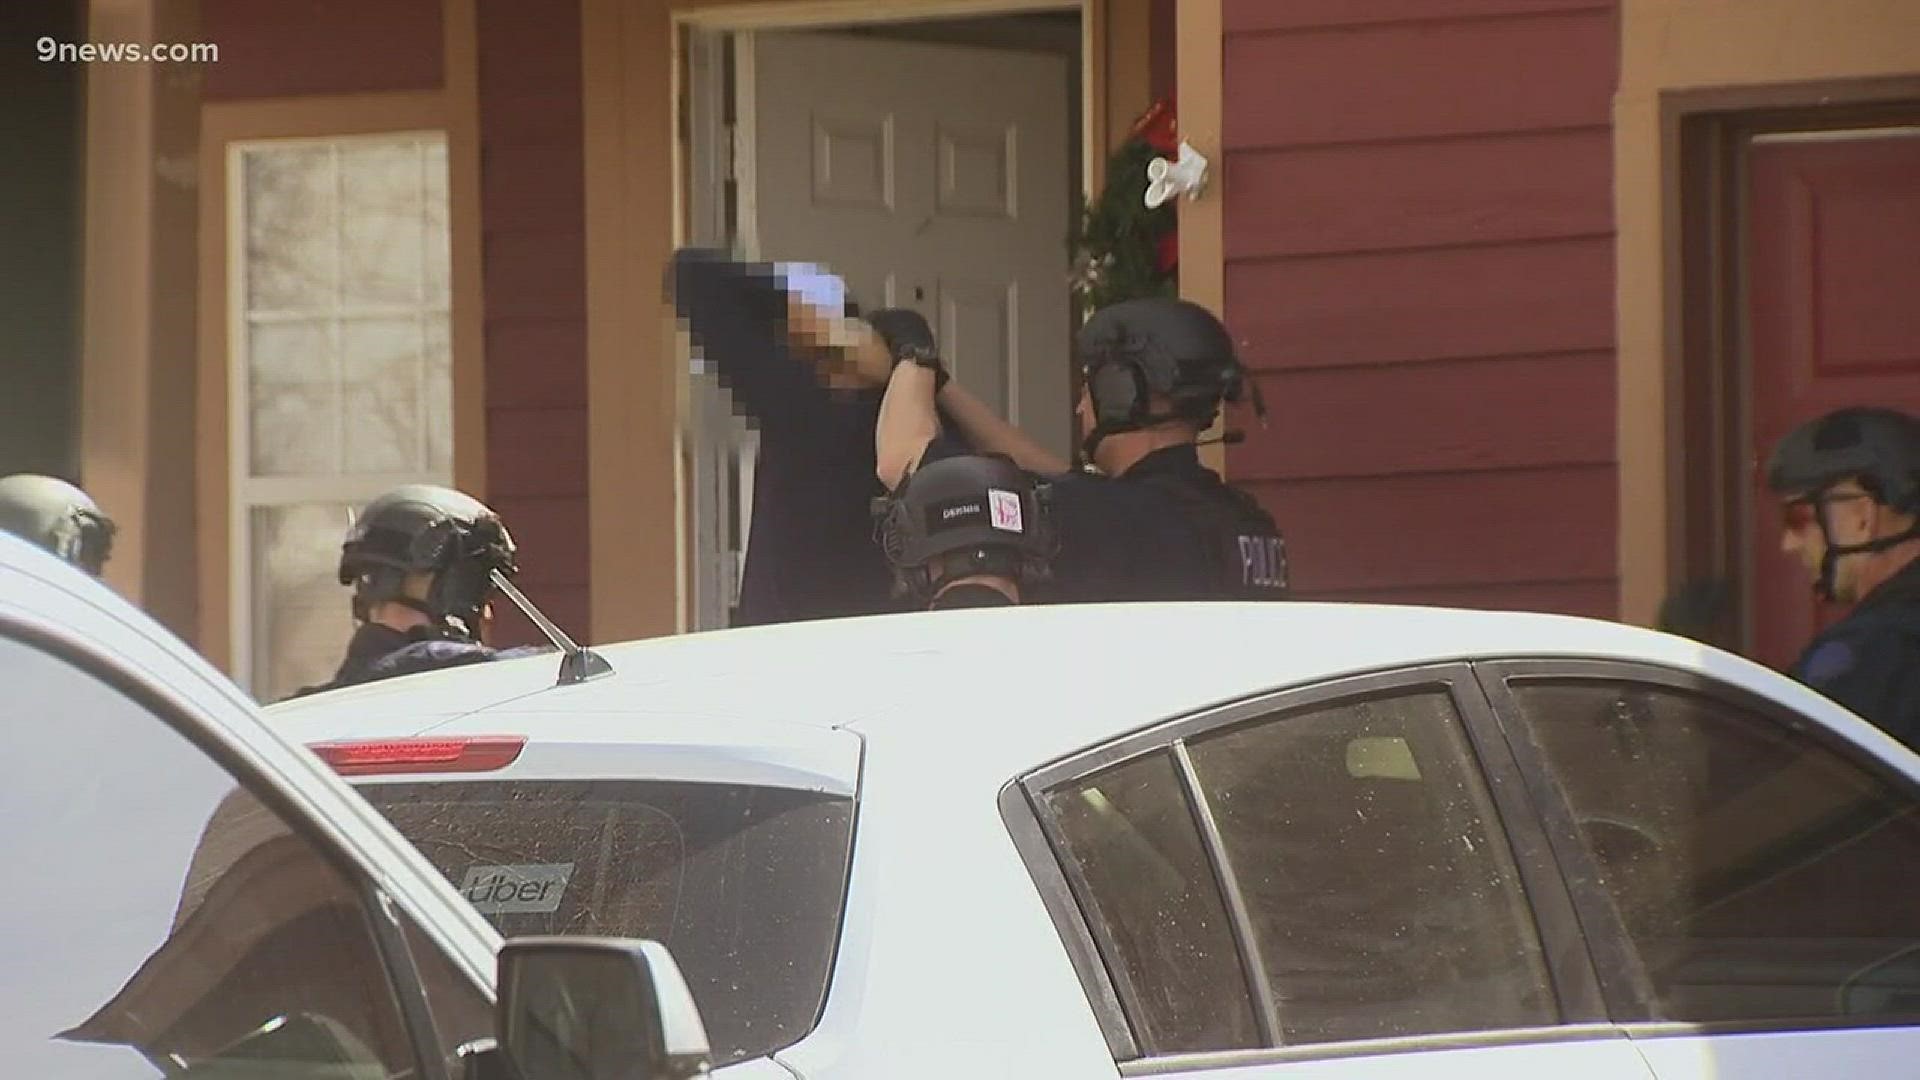 Several law enforcement agencies say the marijuana black market is thriving. We took a look at what happens to home prices as some law enforcement agencies carry out more raids in neighborhoods.